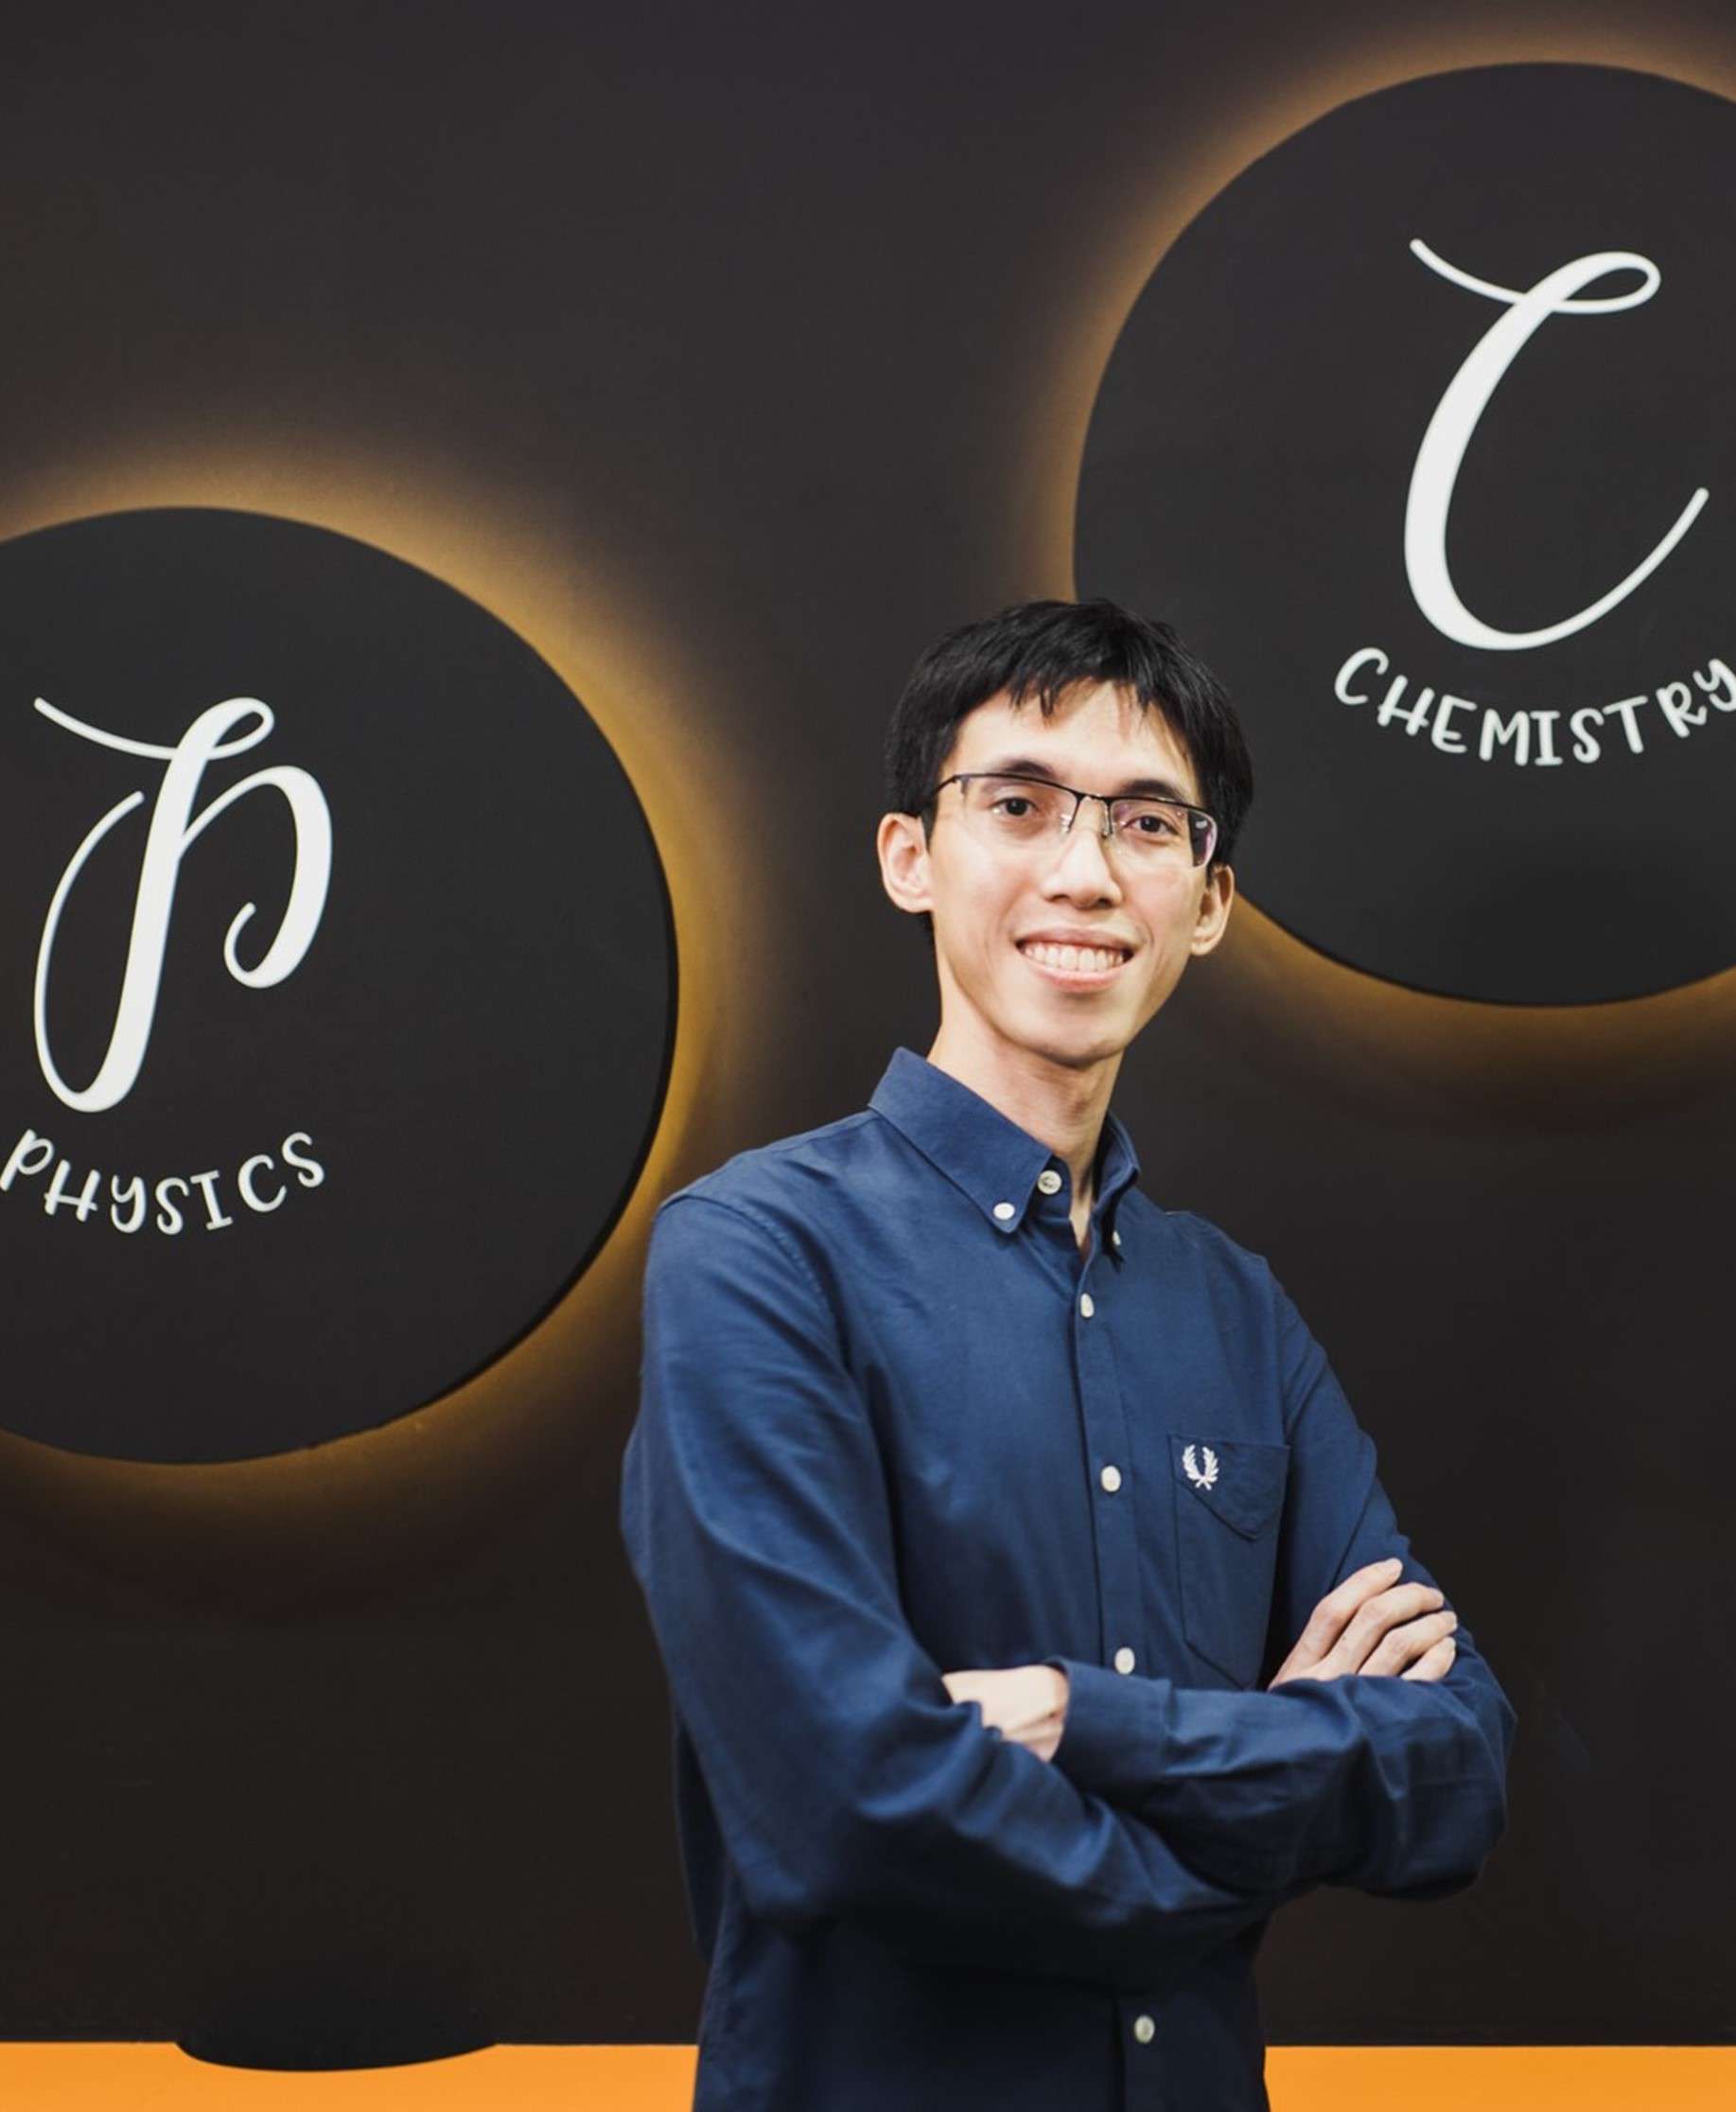 O Level Chemistry tuition teacher in Singapore | New Dawn Learning Studio